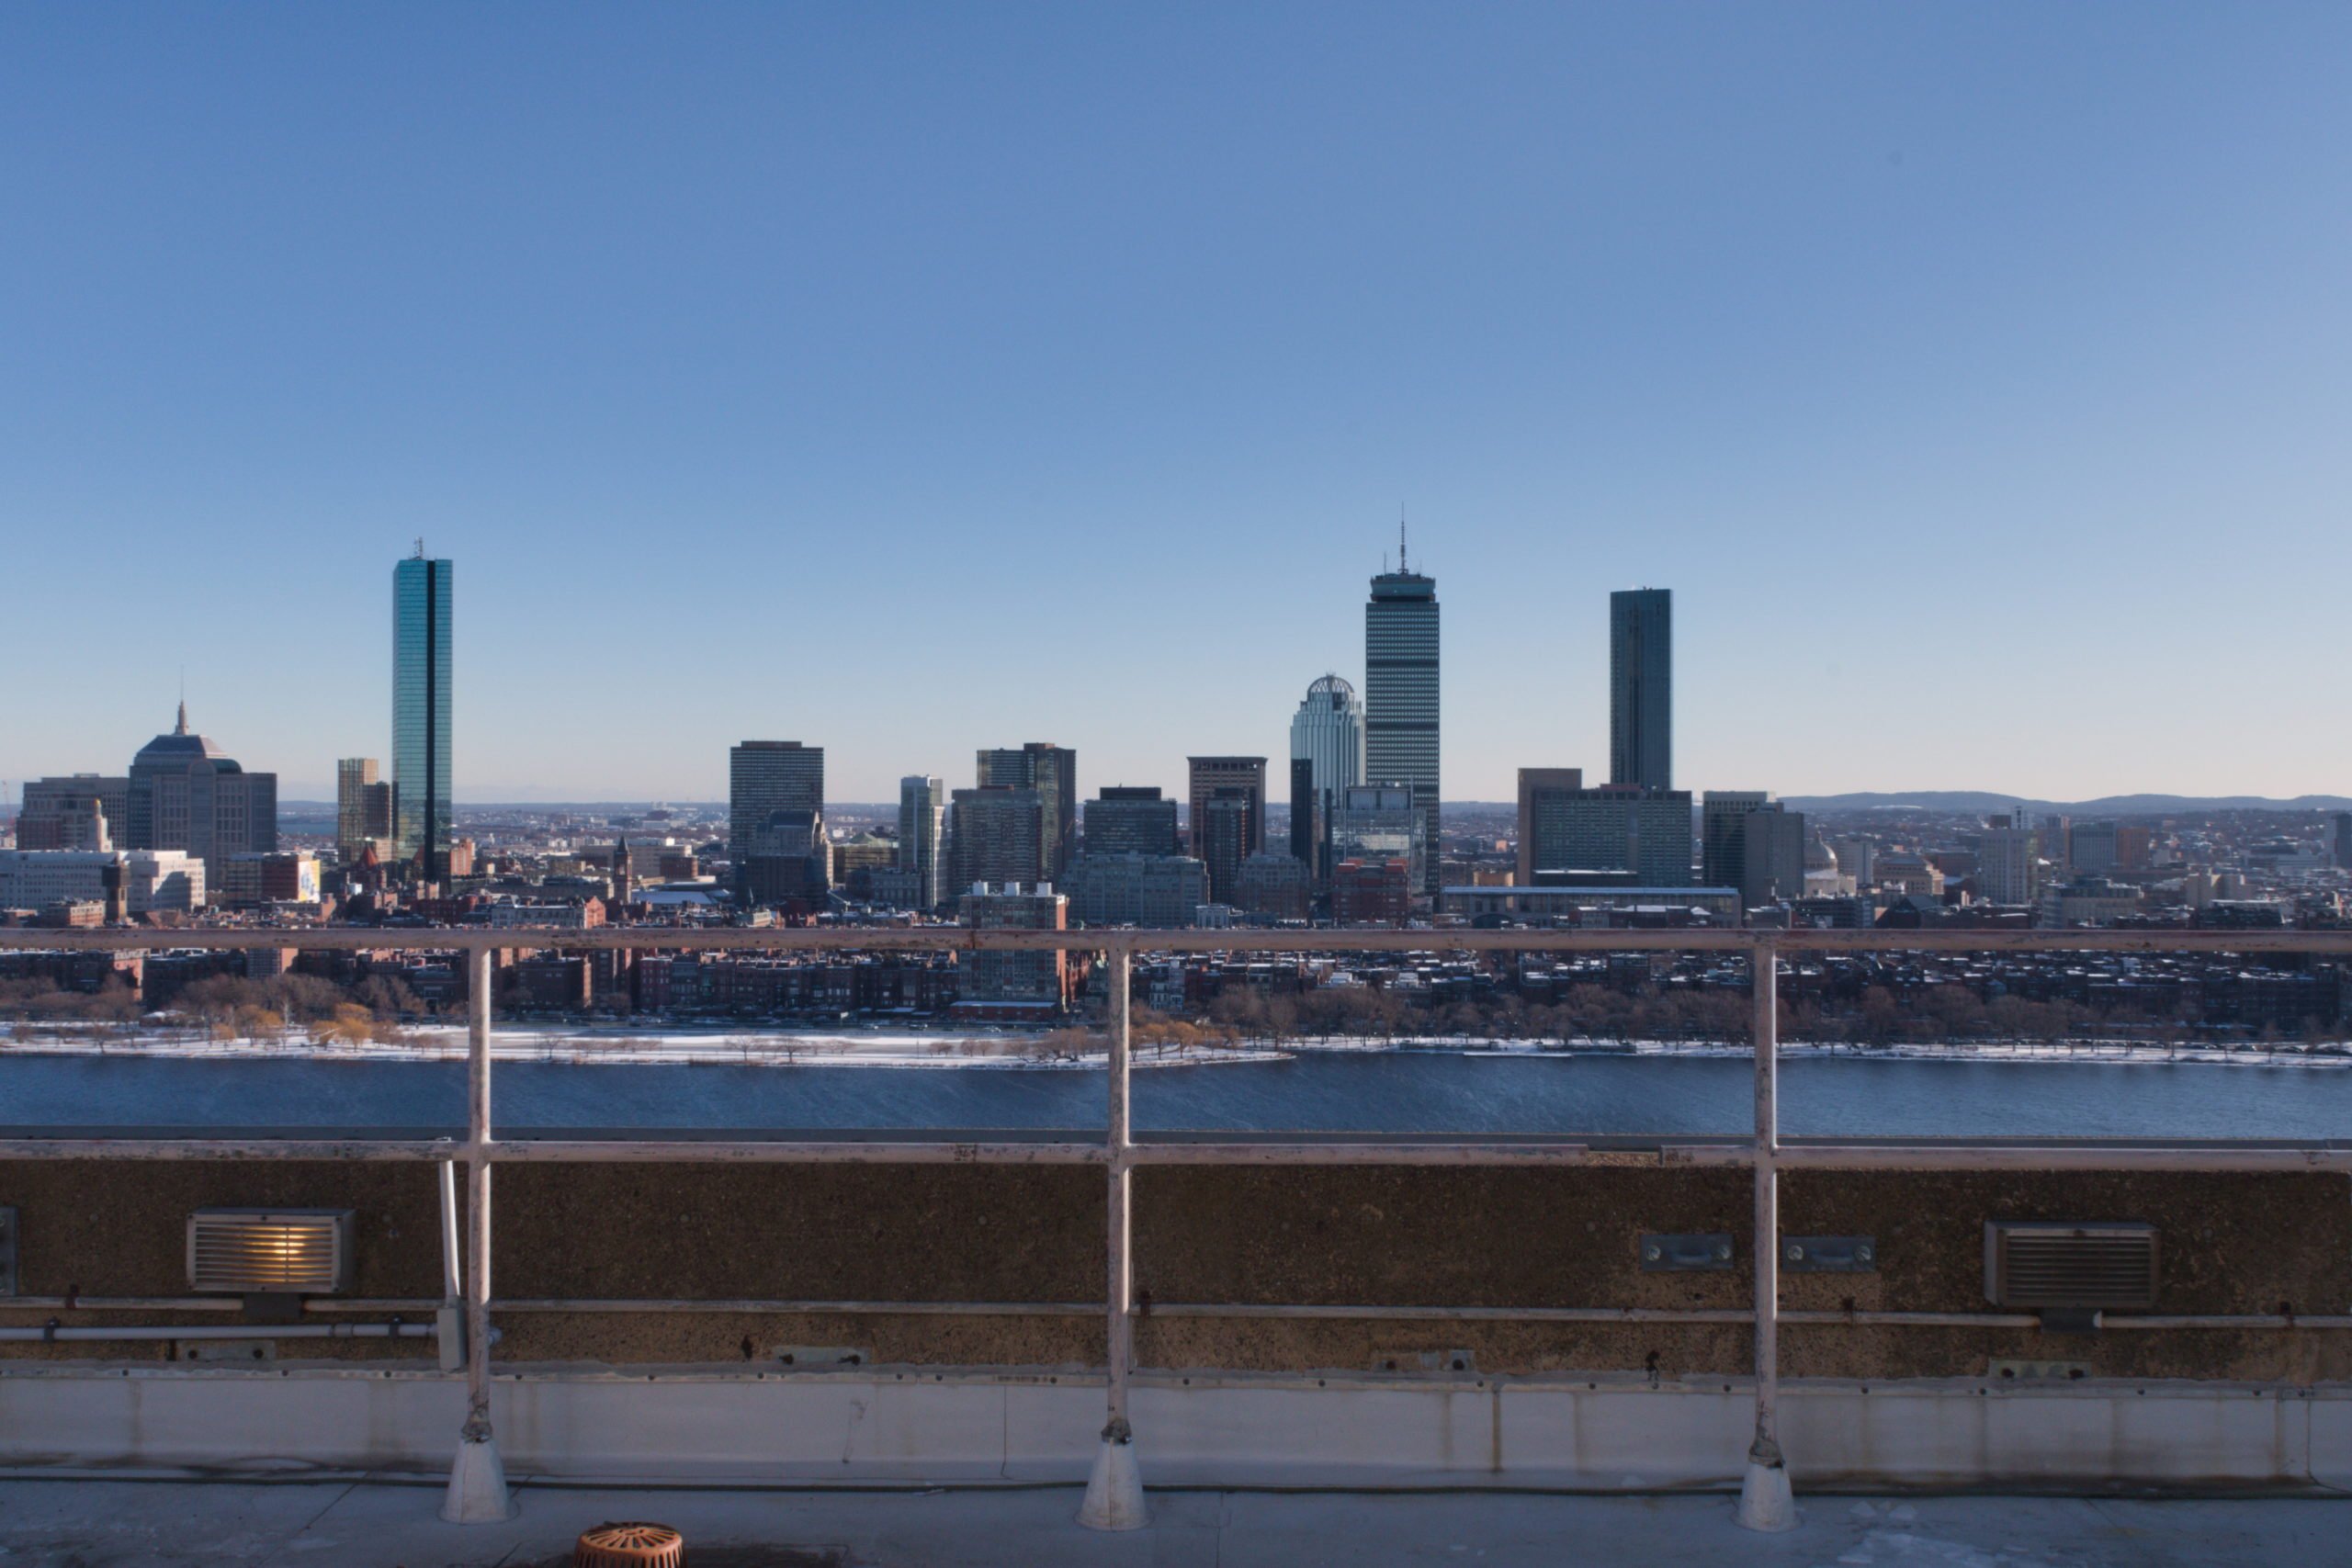 A view from the roof of the Boston skyline across the river.